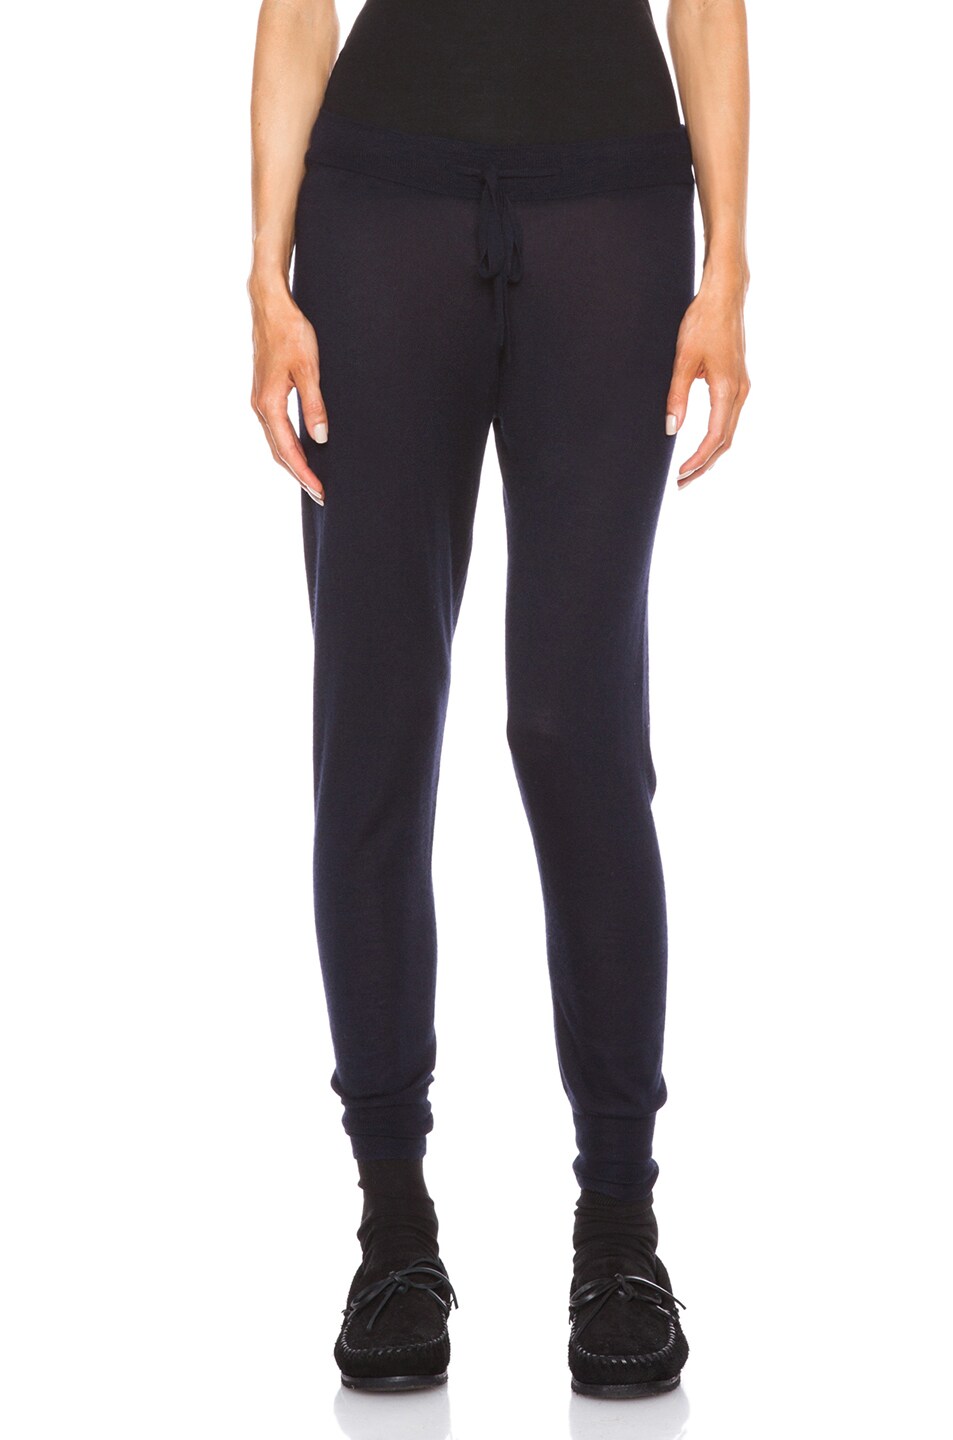 Isabel Marant Tyron Cashmere-Blend Sweatpant in Midnight | FWRD